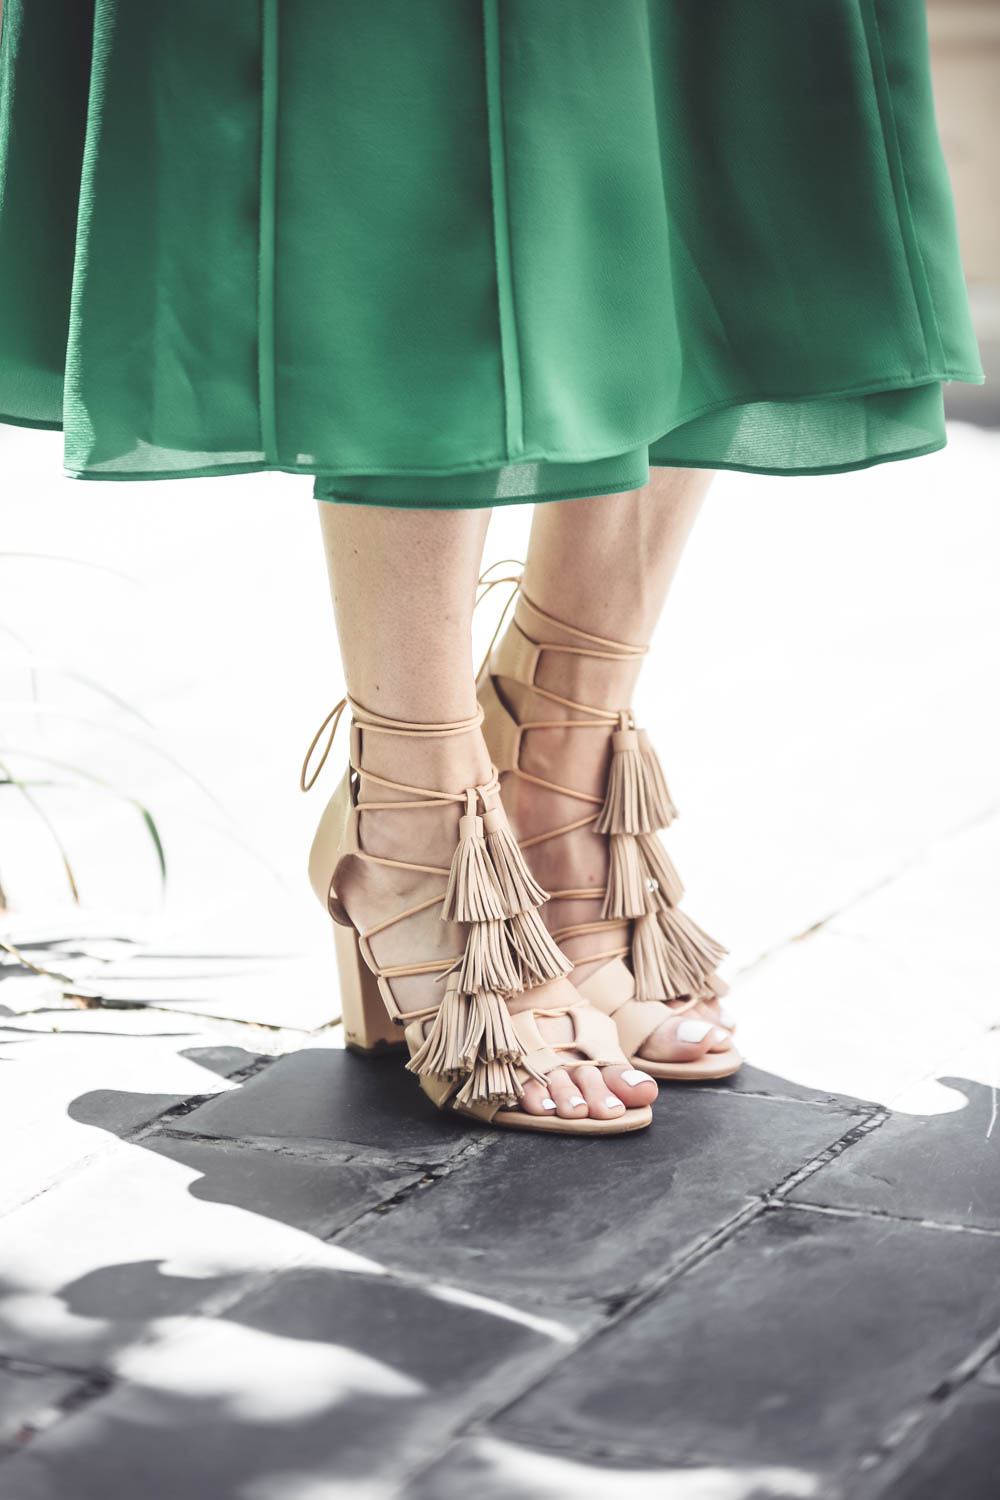 Best nude sandals for summer featuring these gorgoeus 'luz' tassel sandals by Loeffler Randall from Nordstrom and a silky green midi dress from Banana Republic